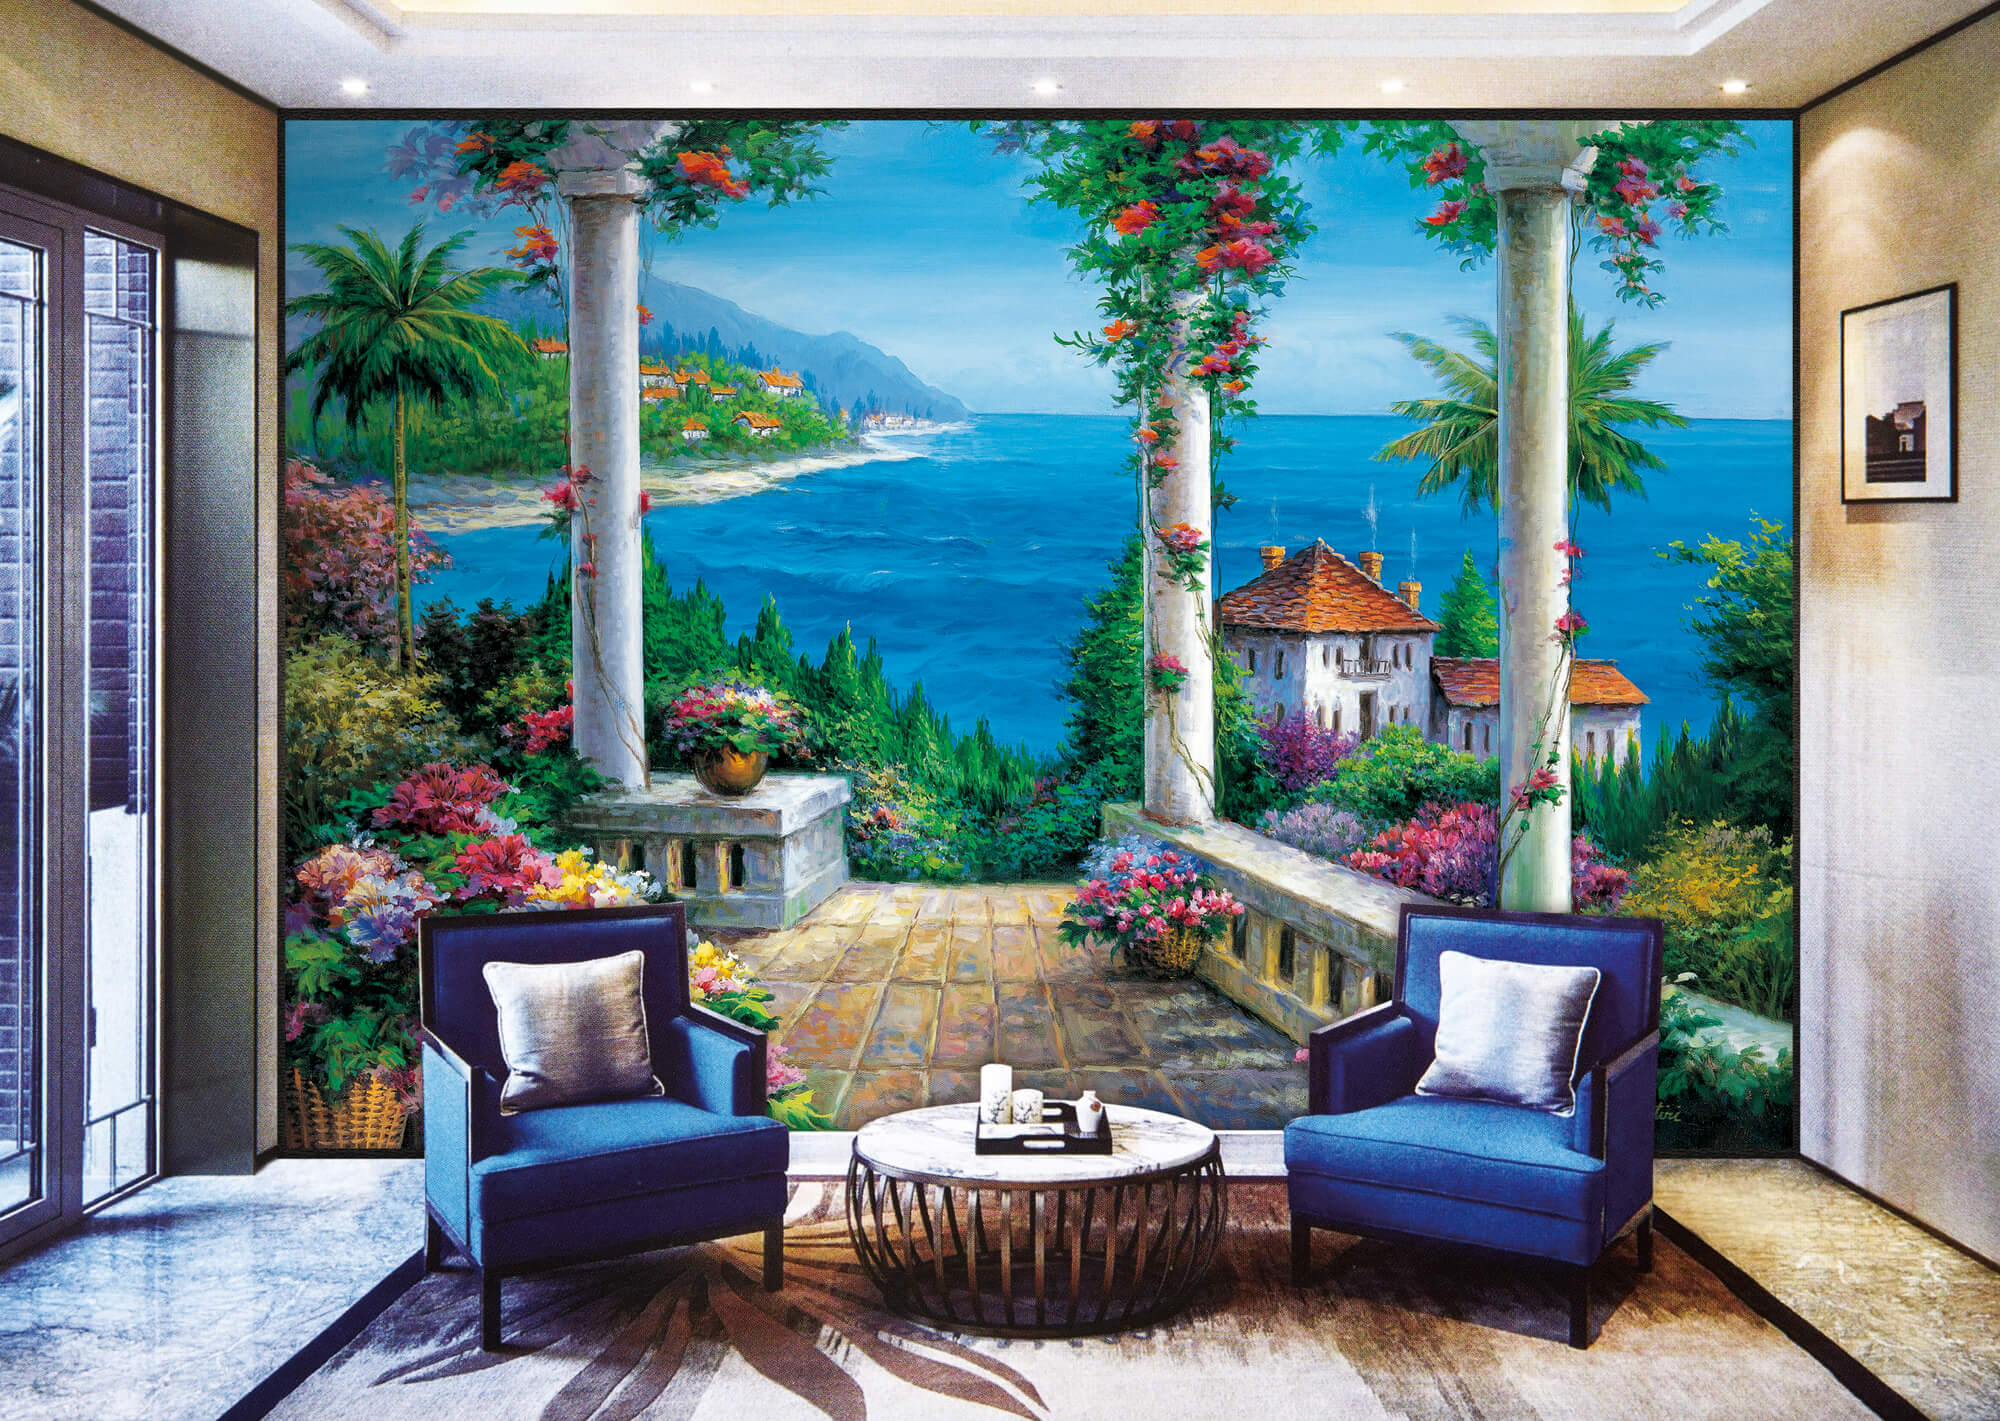 Floral Patio PR1812 Wall Mural |Full Size Large Wall Murals |The Mural ...